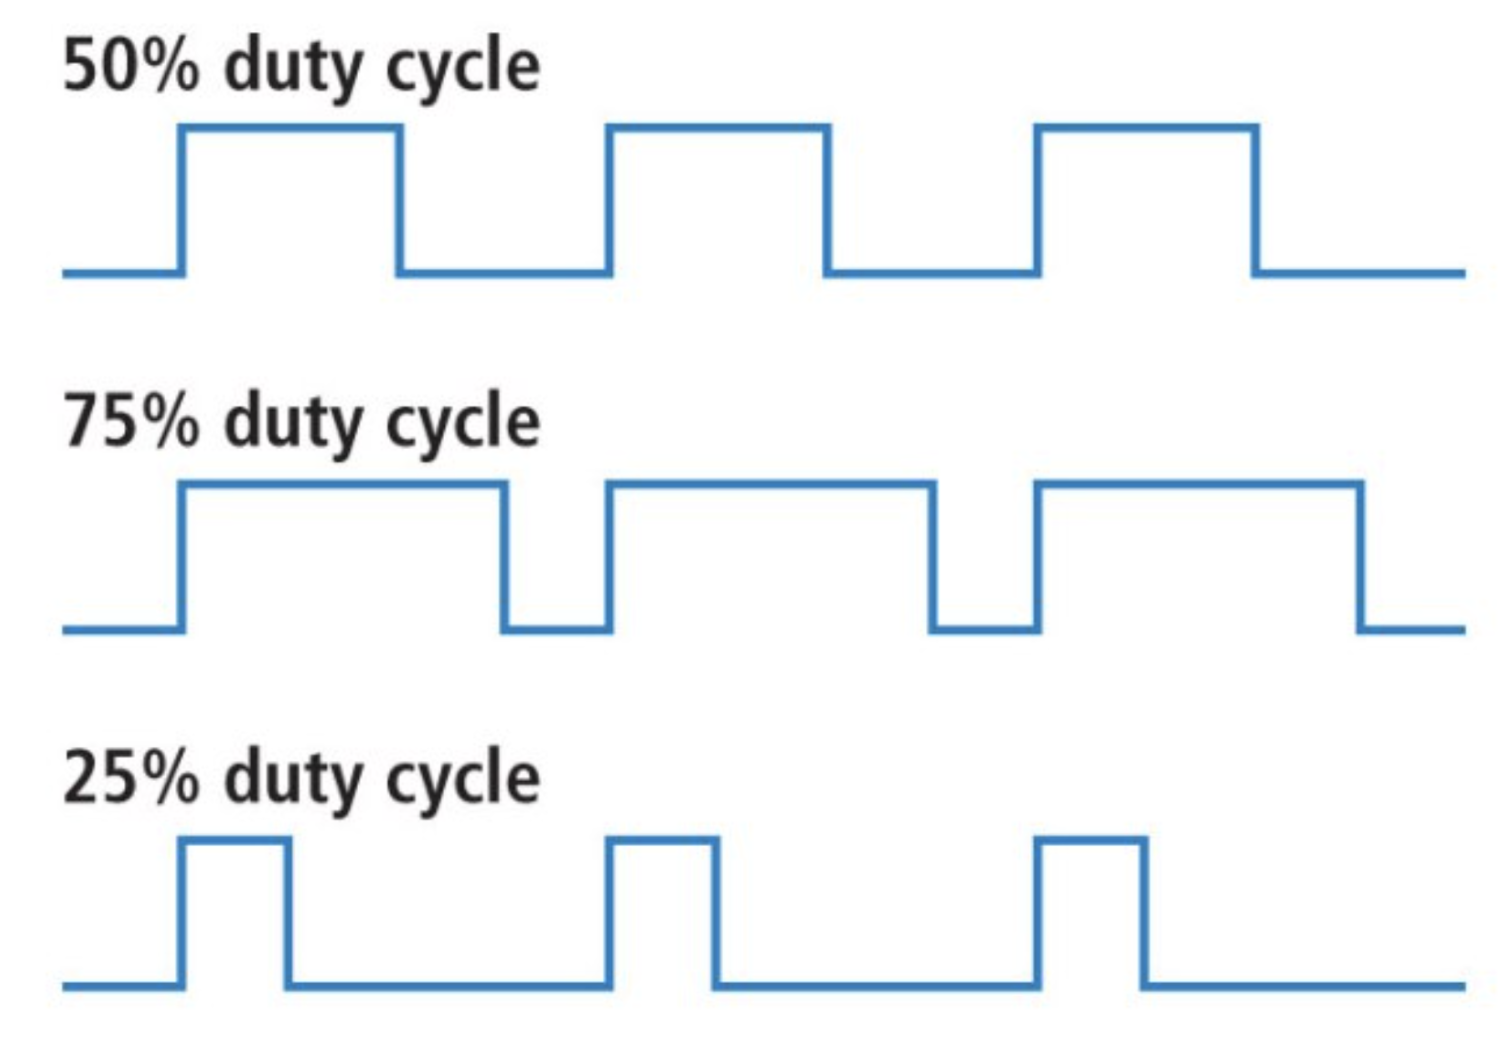 pic of duty cycles